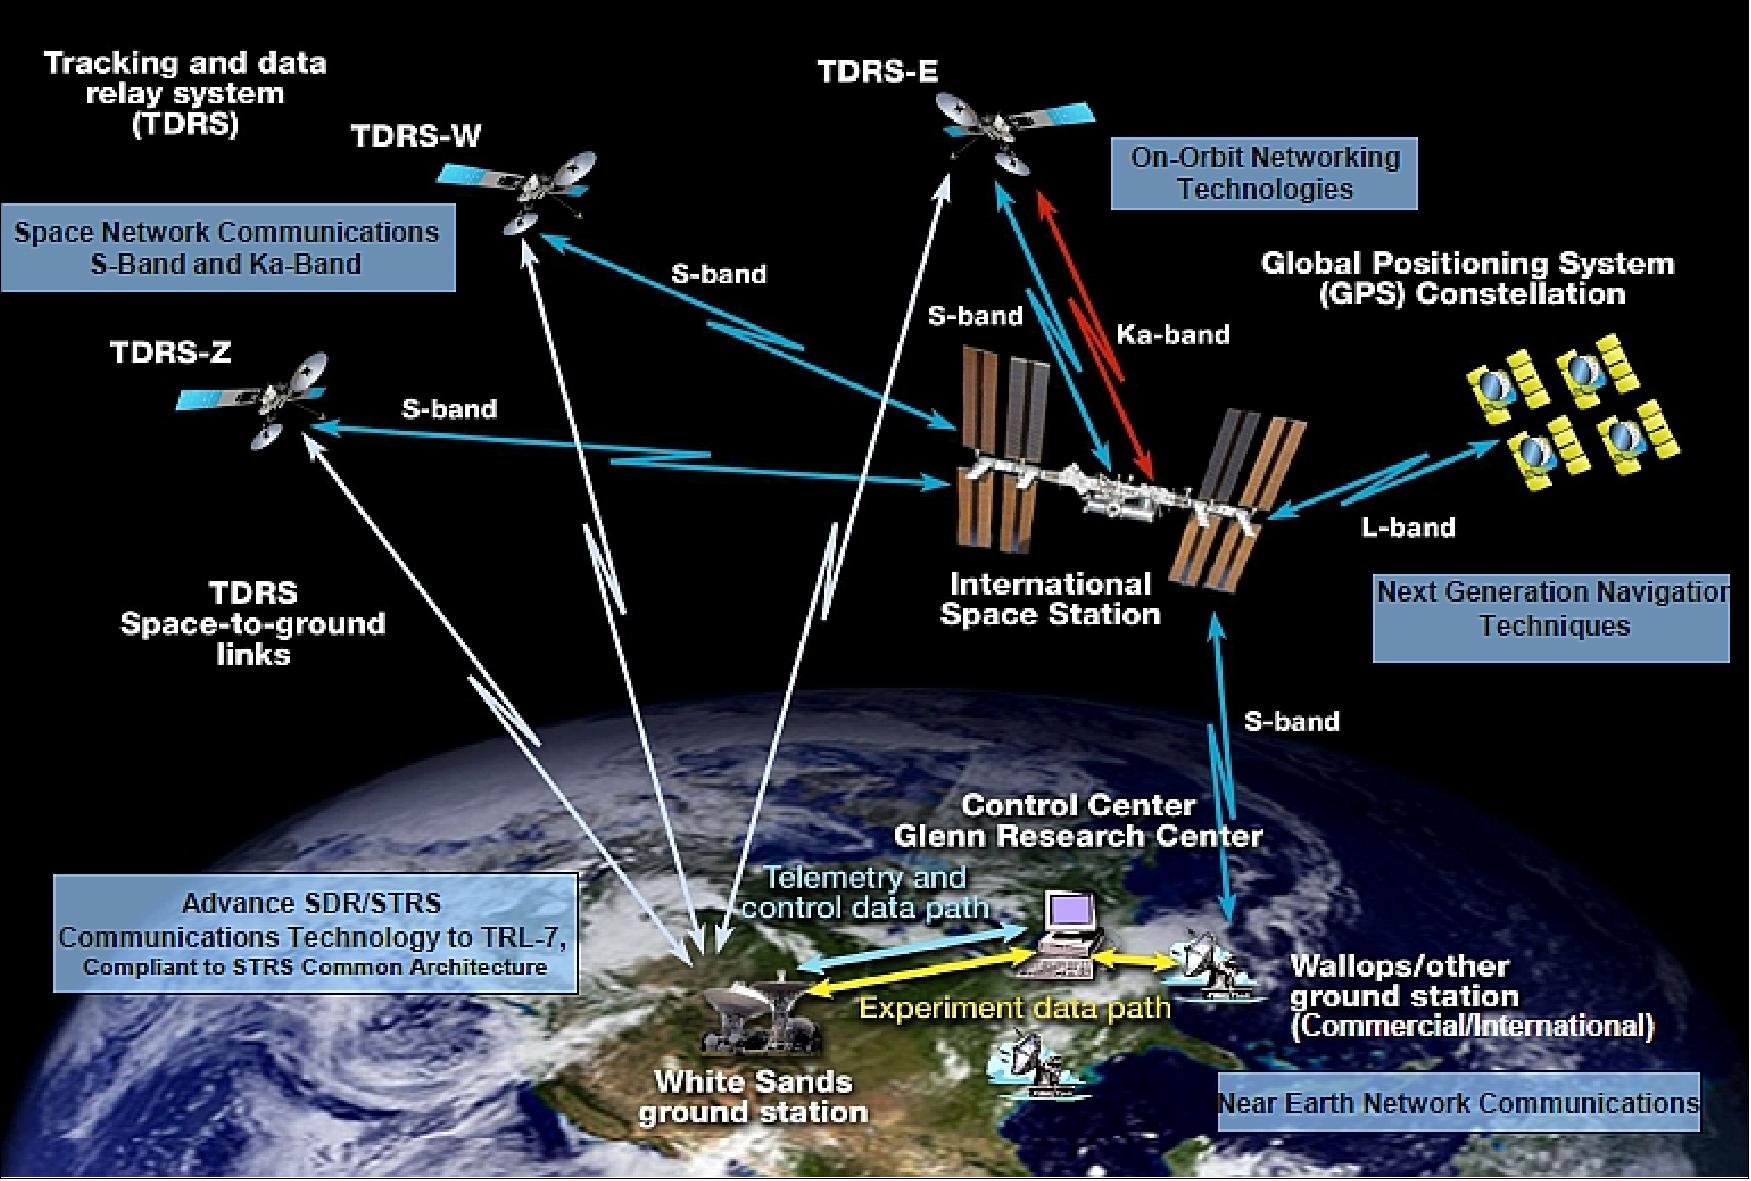 Figure 1: Overview of the SCaN Testbed communication links (image credit: NASA)